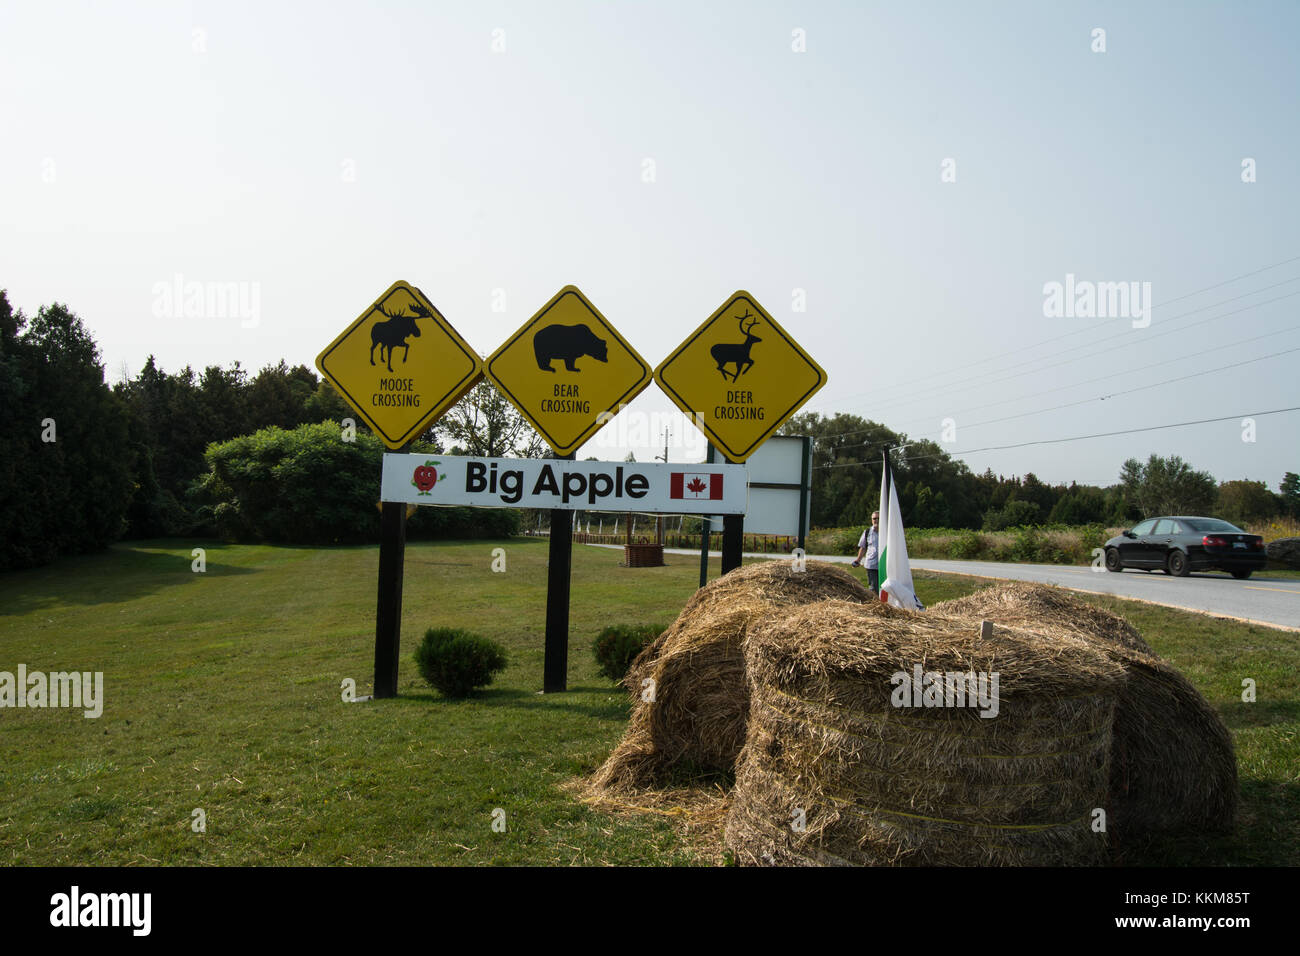 Animal sign Ontario Canada The Big apple road signs sign flag Canadian road yellow signs Deer Bear Mouse artwork art triangular outside straw bail Stock Photo